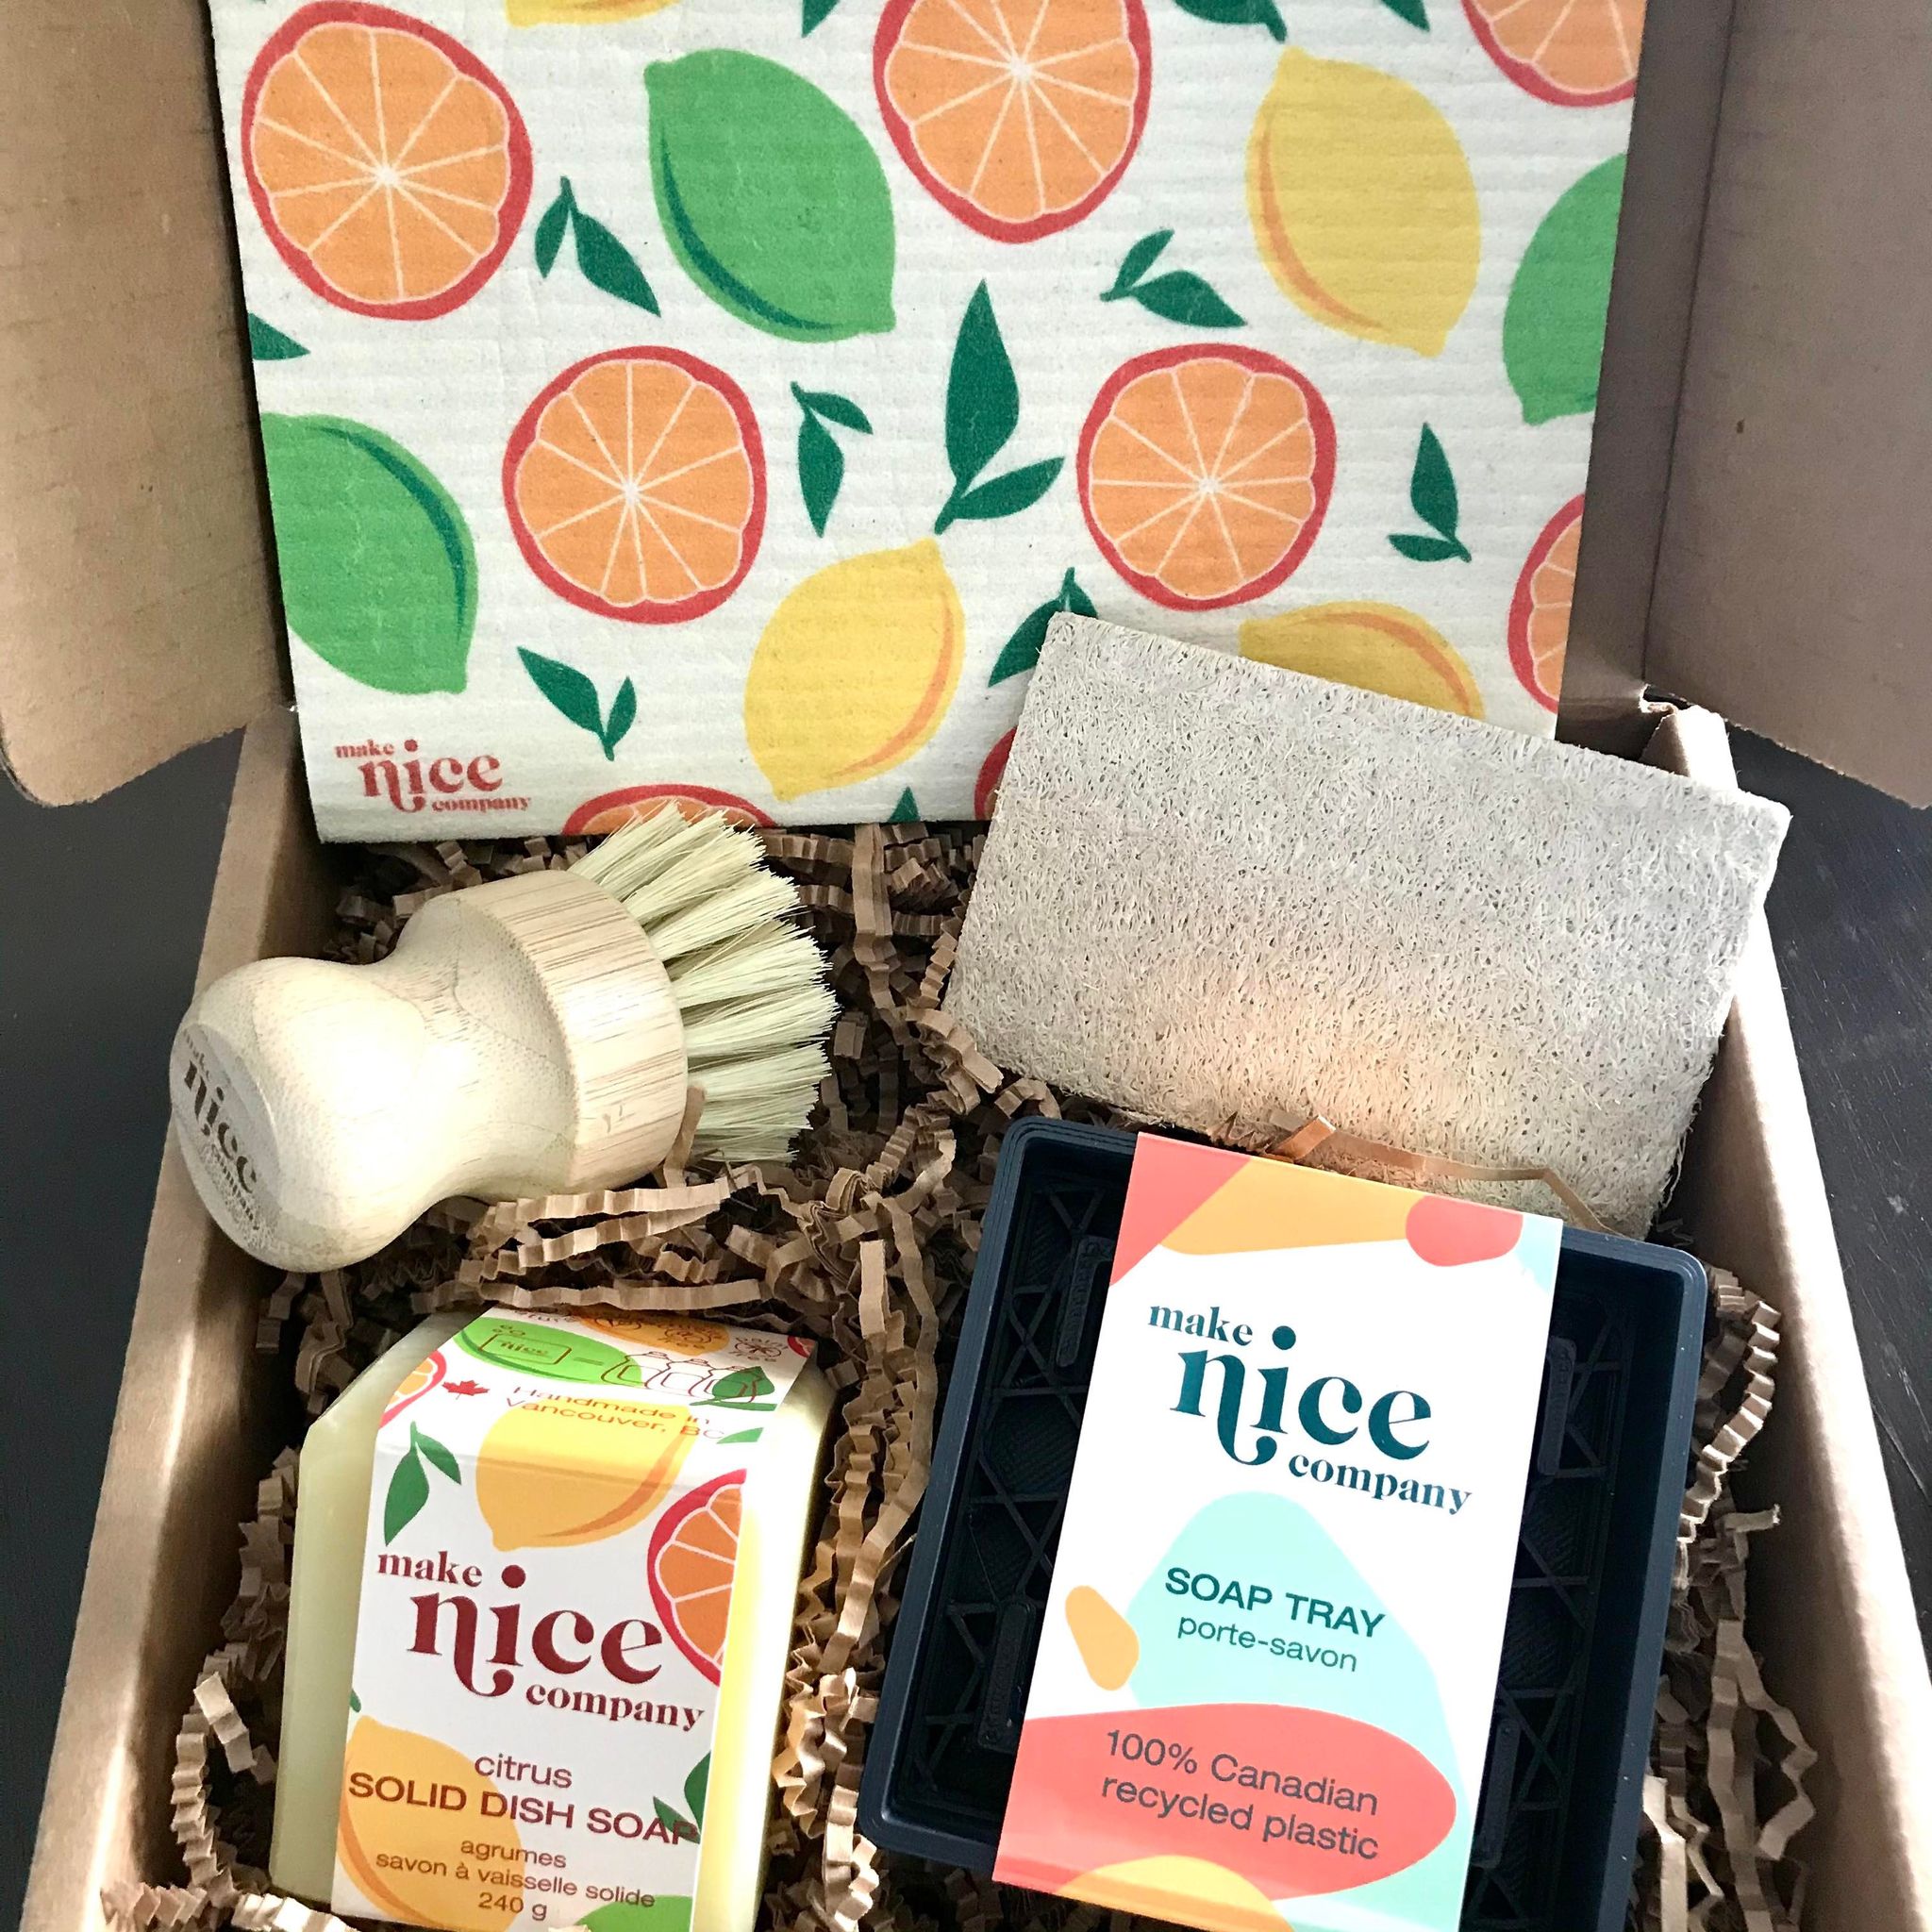 Citrus dish soap bar eco gift set made in Canada by the Make Nice Company includes a sponge cloth, a citrus solid dish soap cube, a dish brush, a recycled plastic soap tray and an expandable loofah sponge